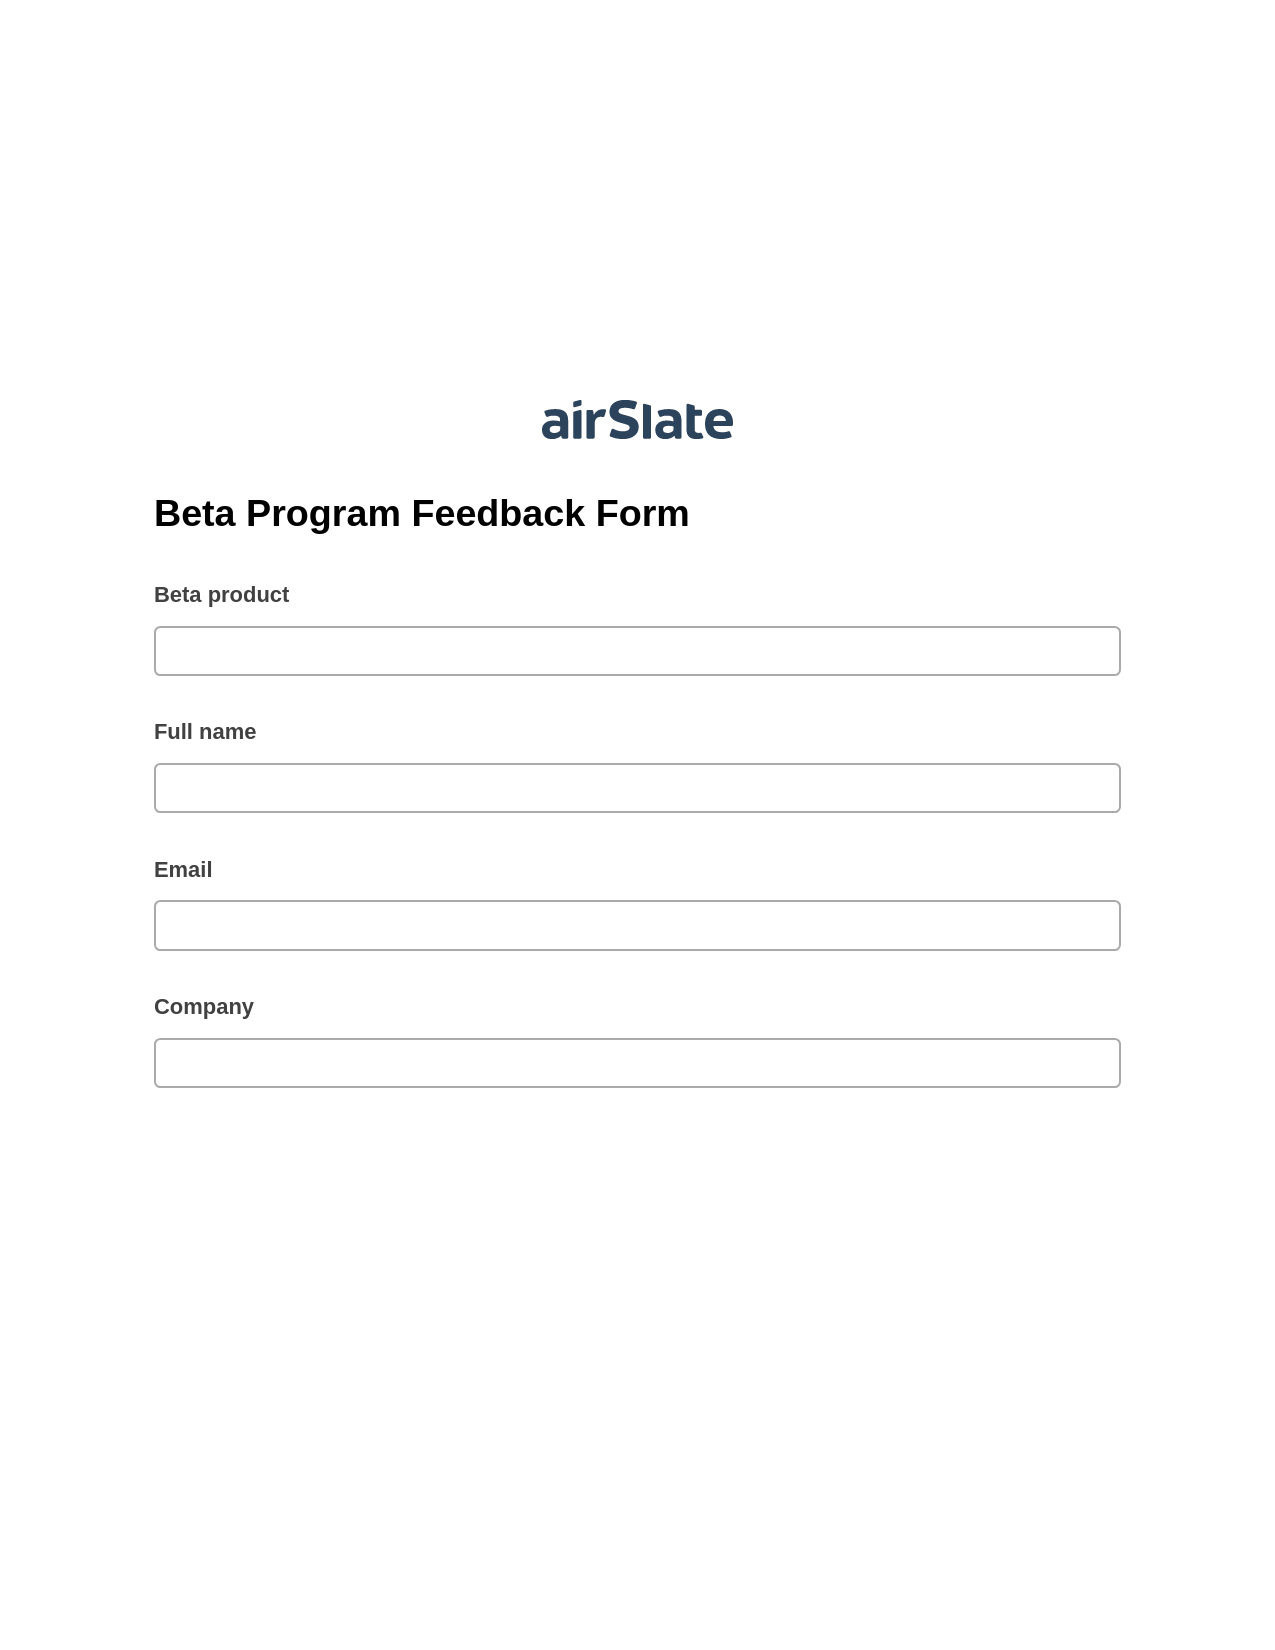 Multirole Beta Program Feedback Form Pre-fill Dropdowns from Google Sheet Bot, Update Salesforce Record Bot, Export to Formstack Documents Bot